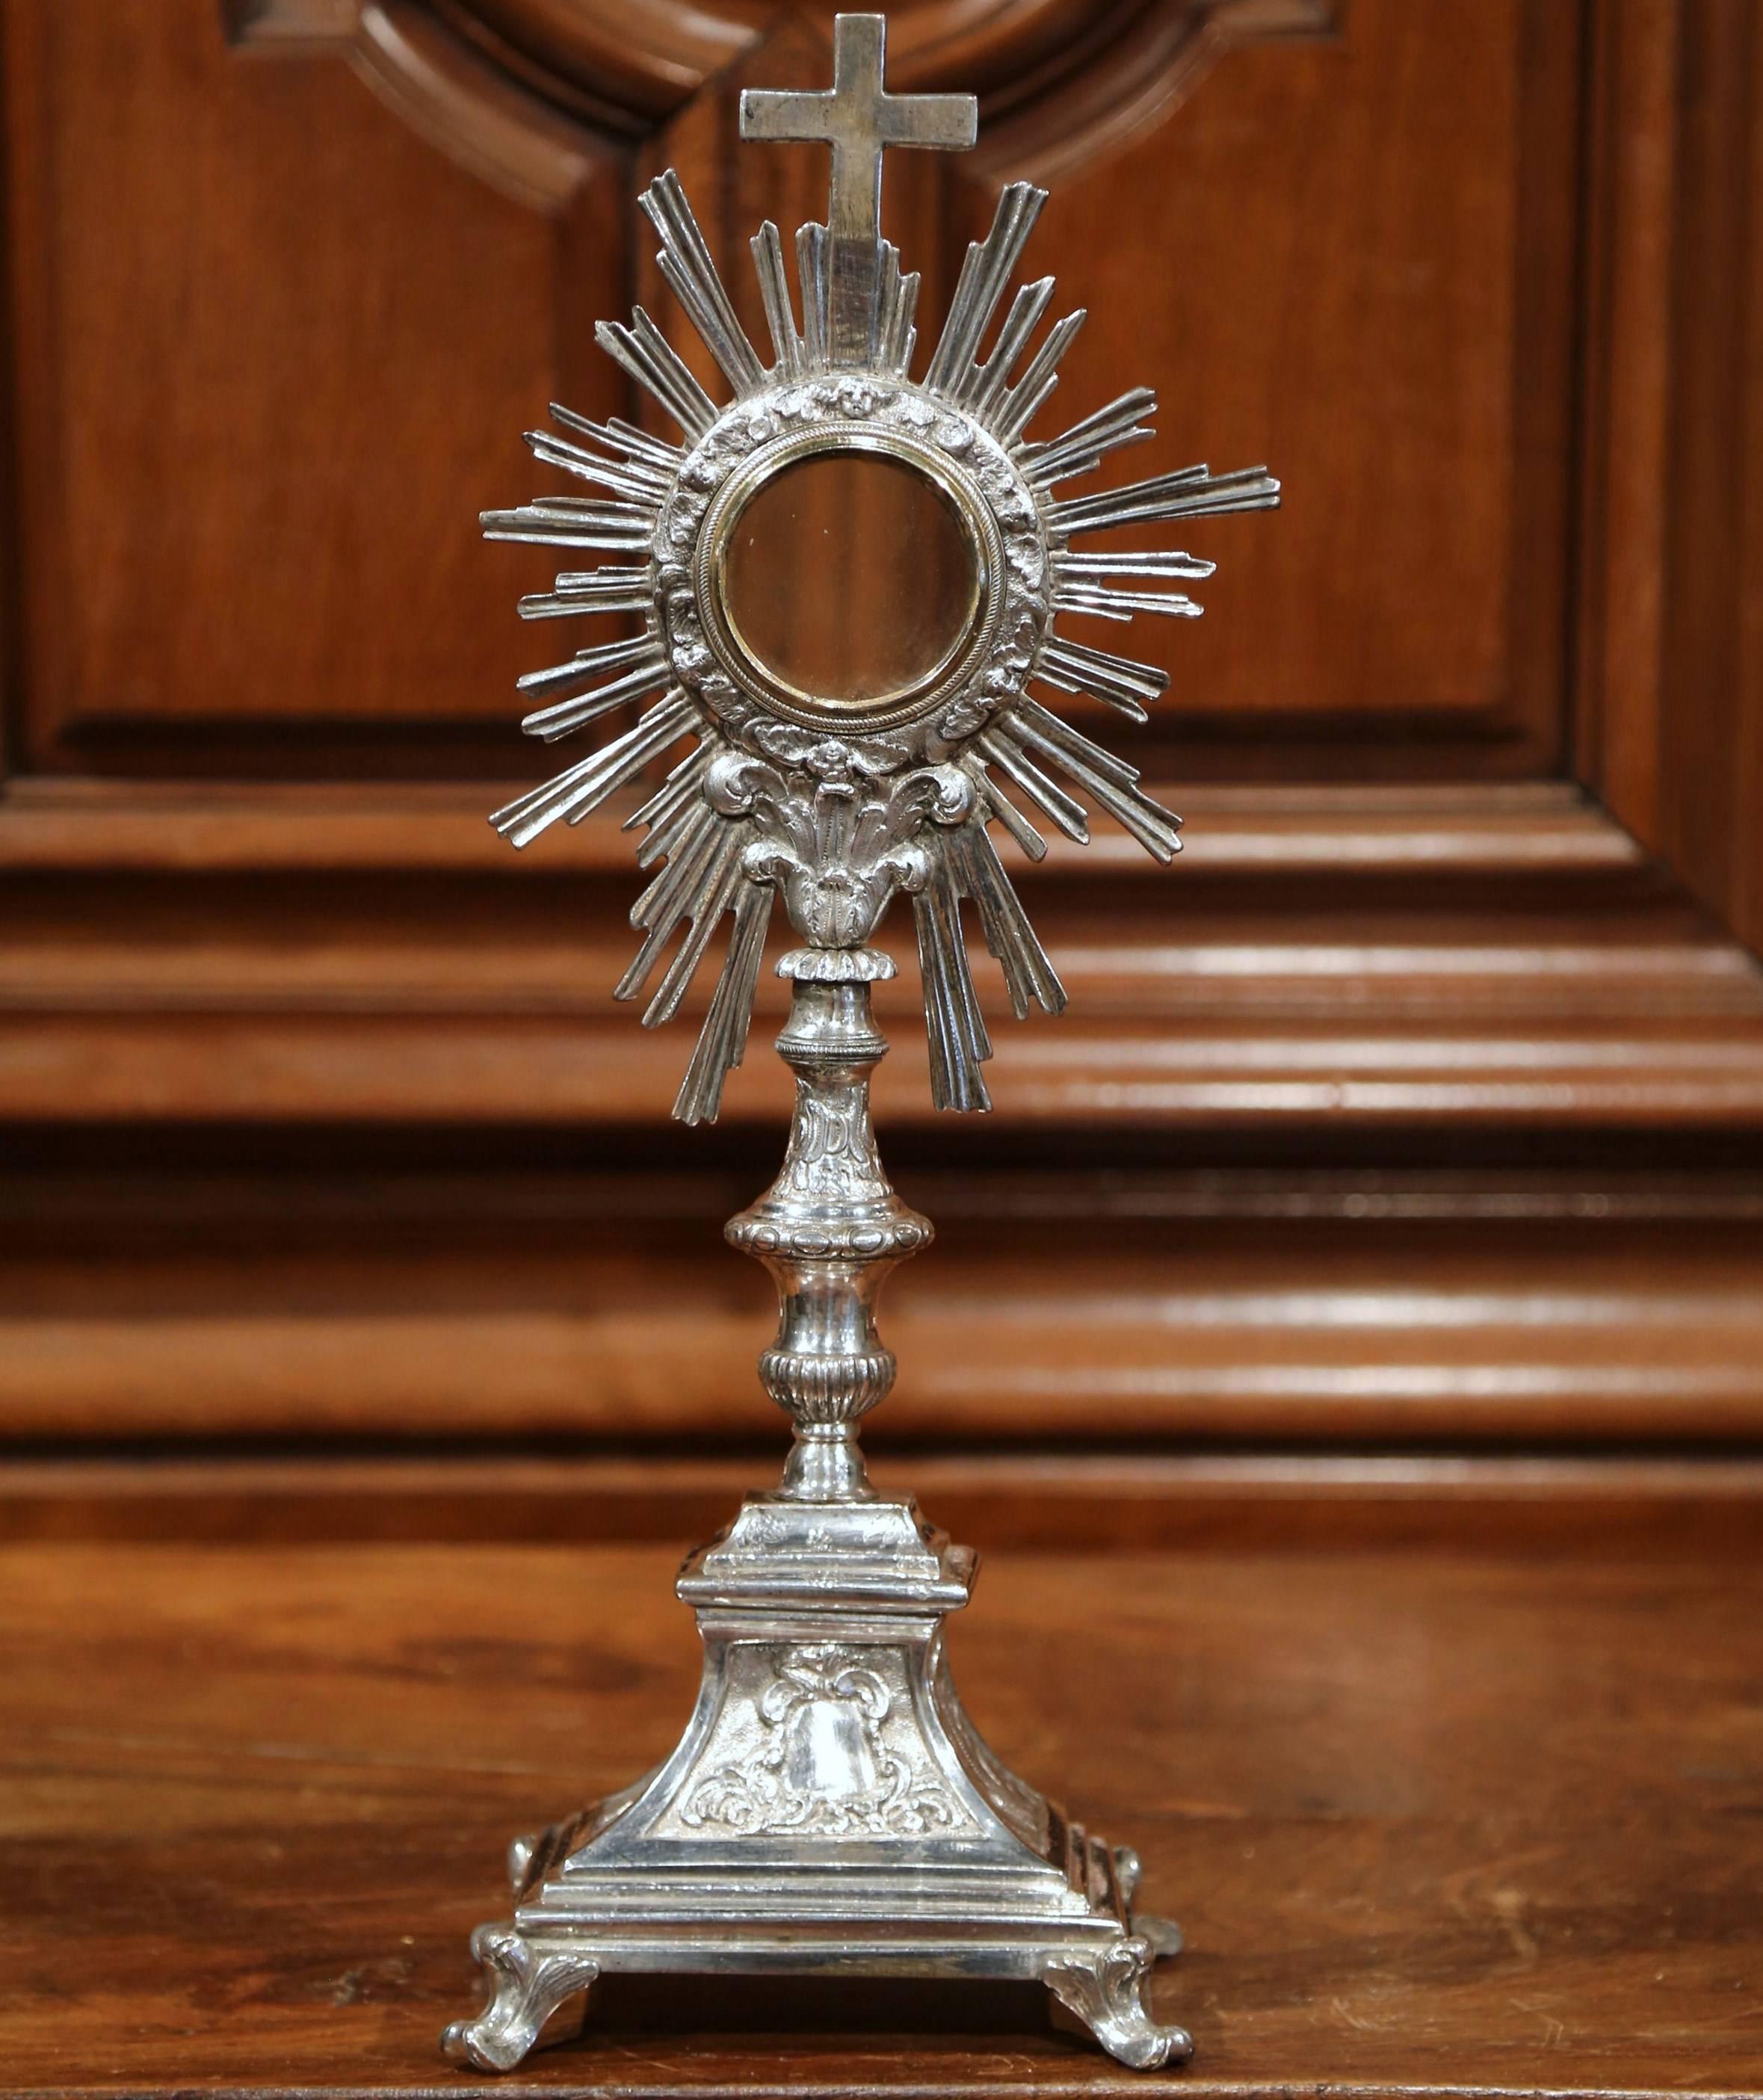 Hand-Crafted 19th Century French Bronze Silvered Catholic Monstrance with Cross & Shining Sun